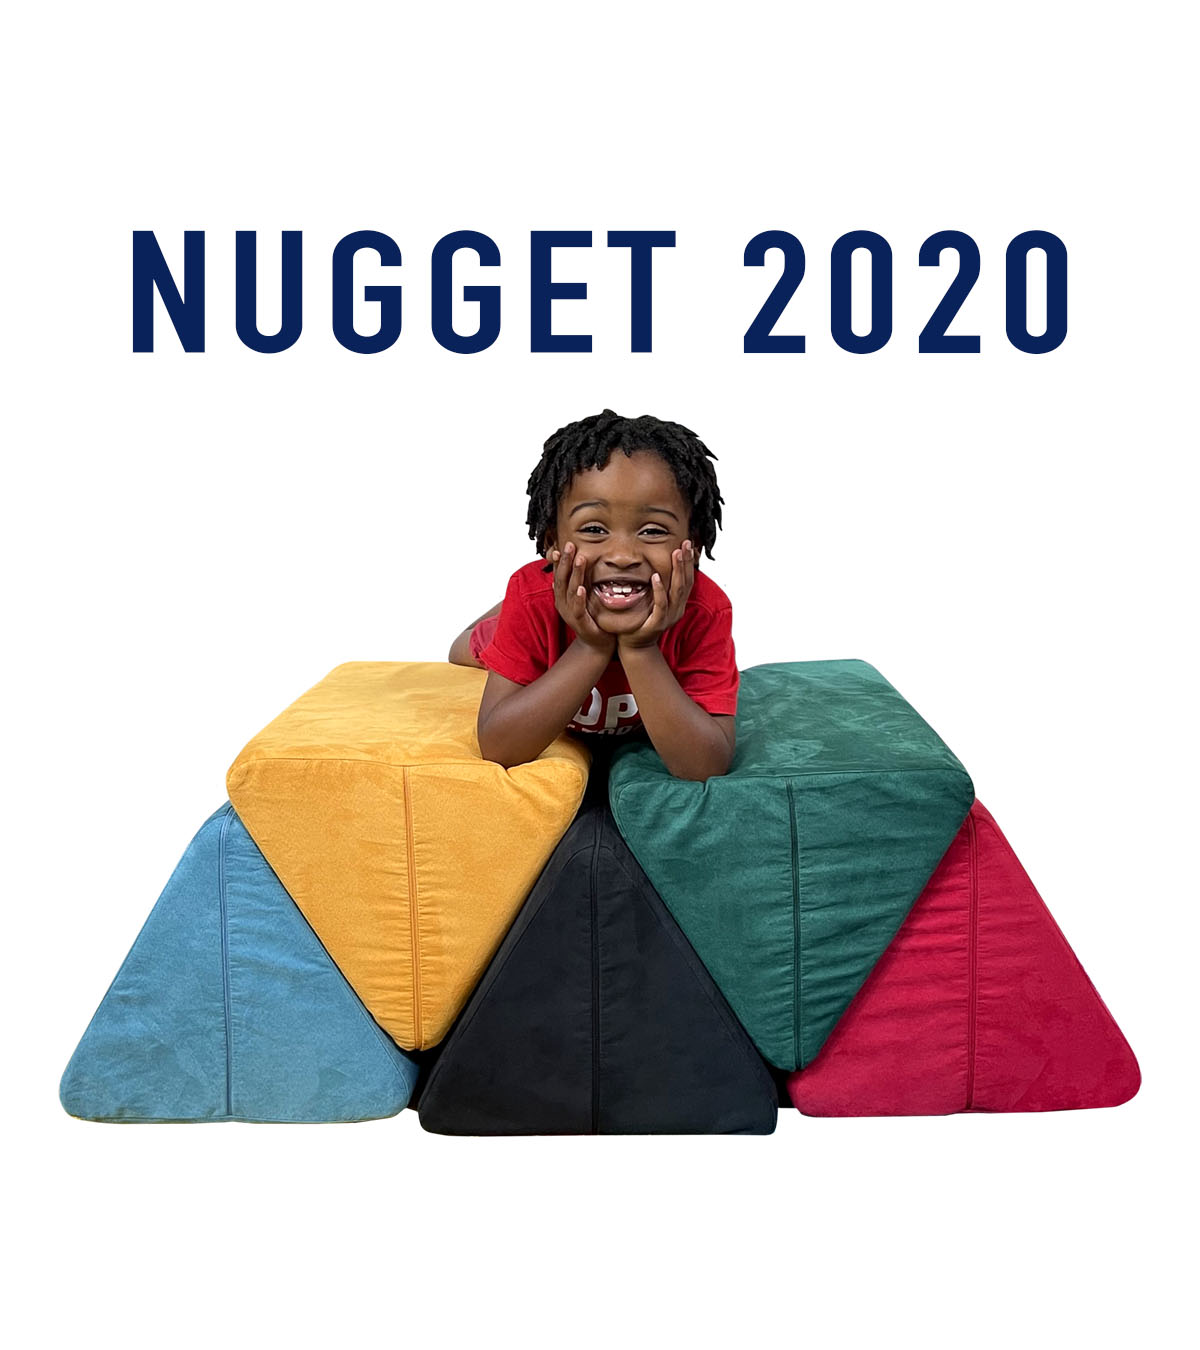 "Nugget 2020" with kid grinning on top of five Nugget pillows configured like Olympic rings